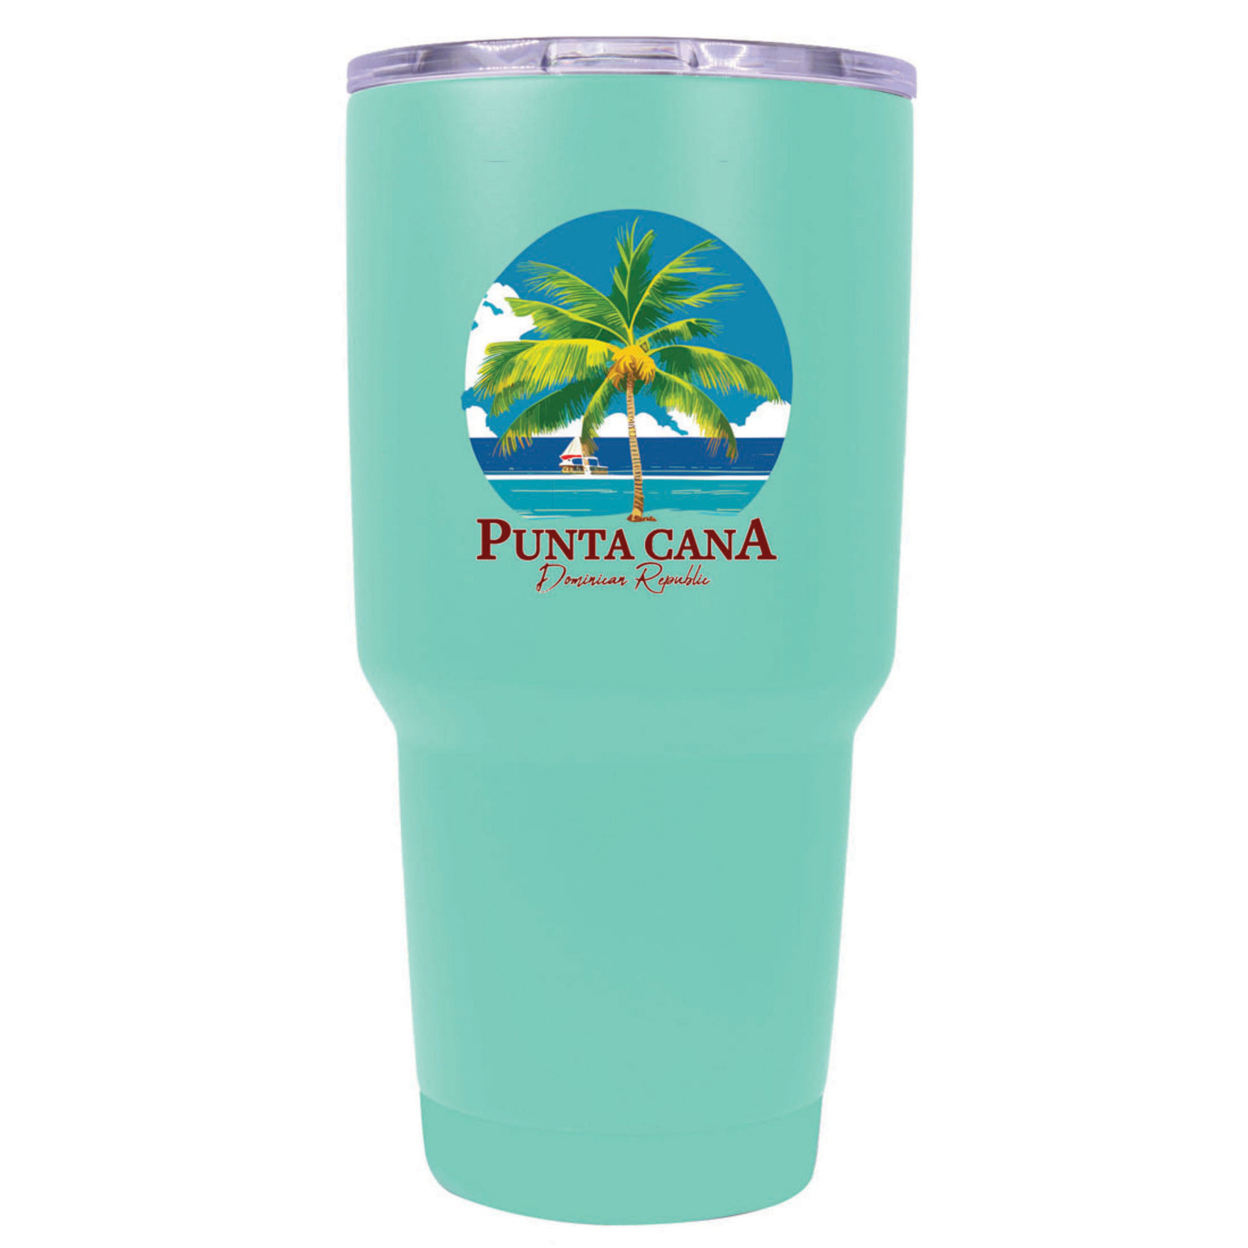 Punta Cana Dominican Republic Souvenir 24 Oz Insulated Stainless Steel Tumbler - Stainless Steel, PARROT